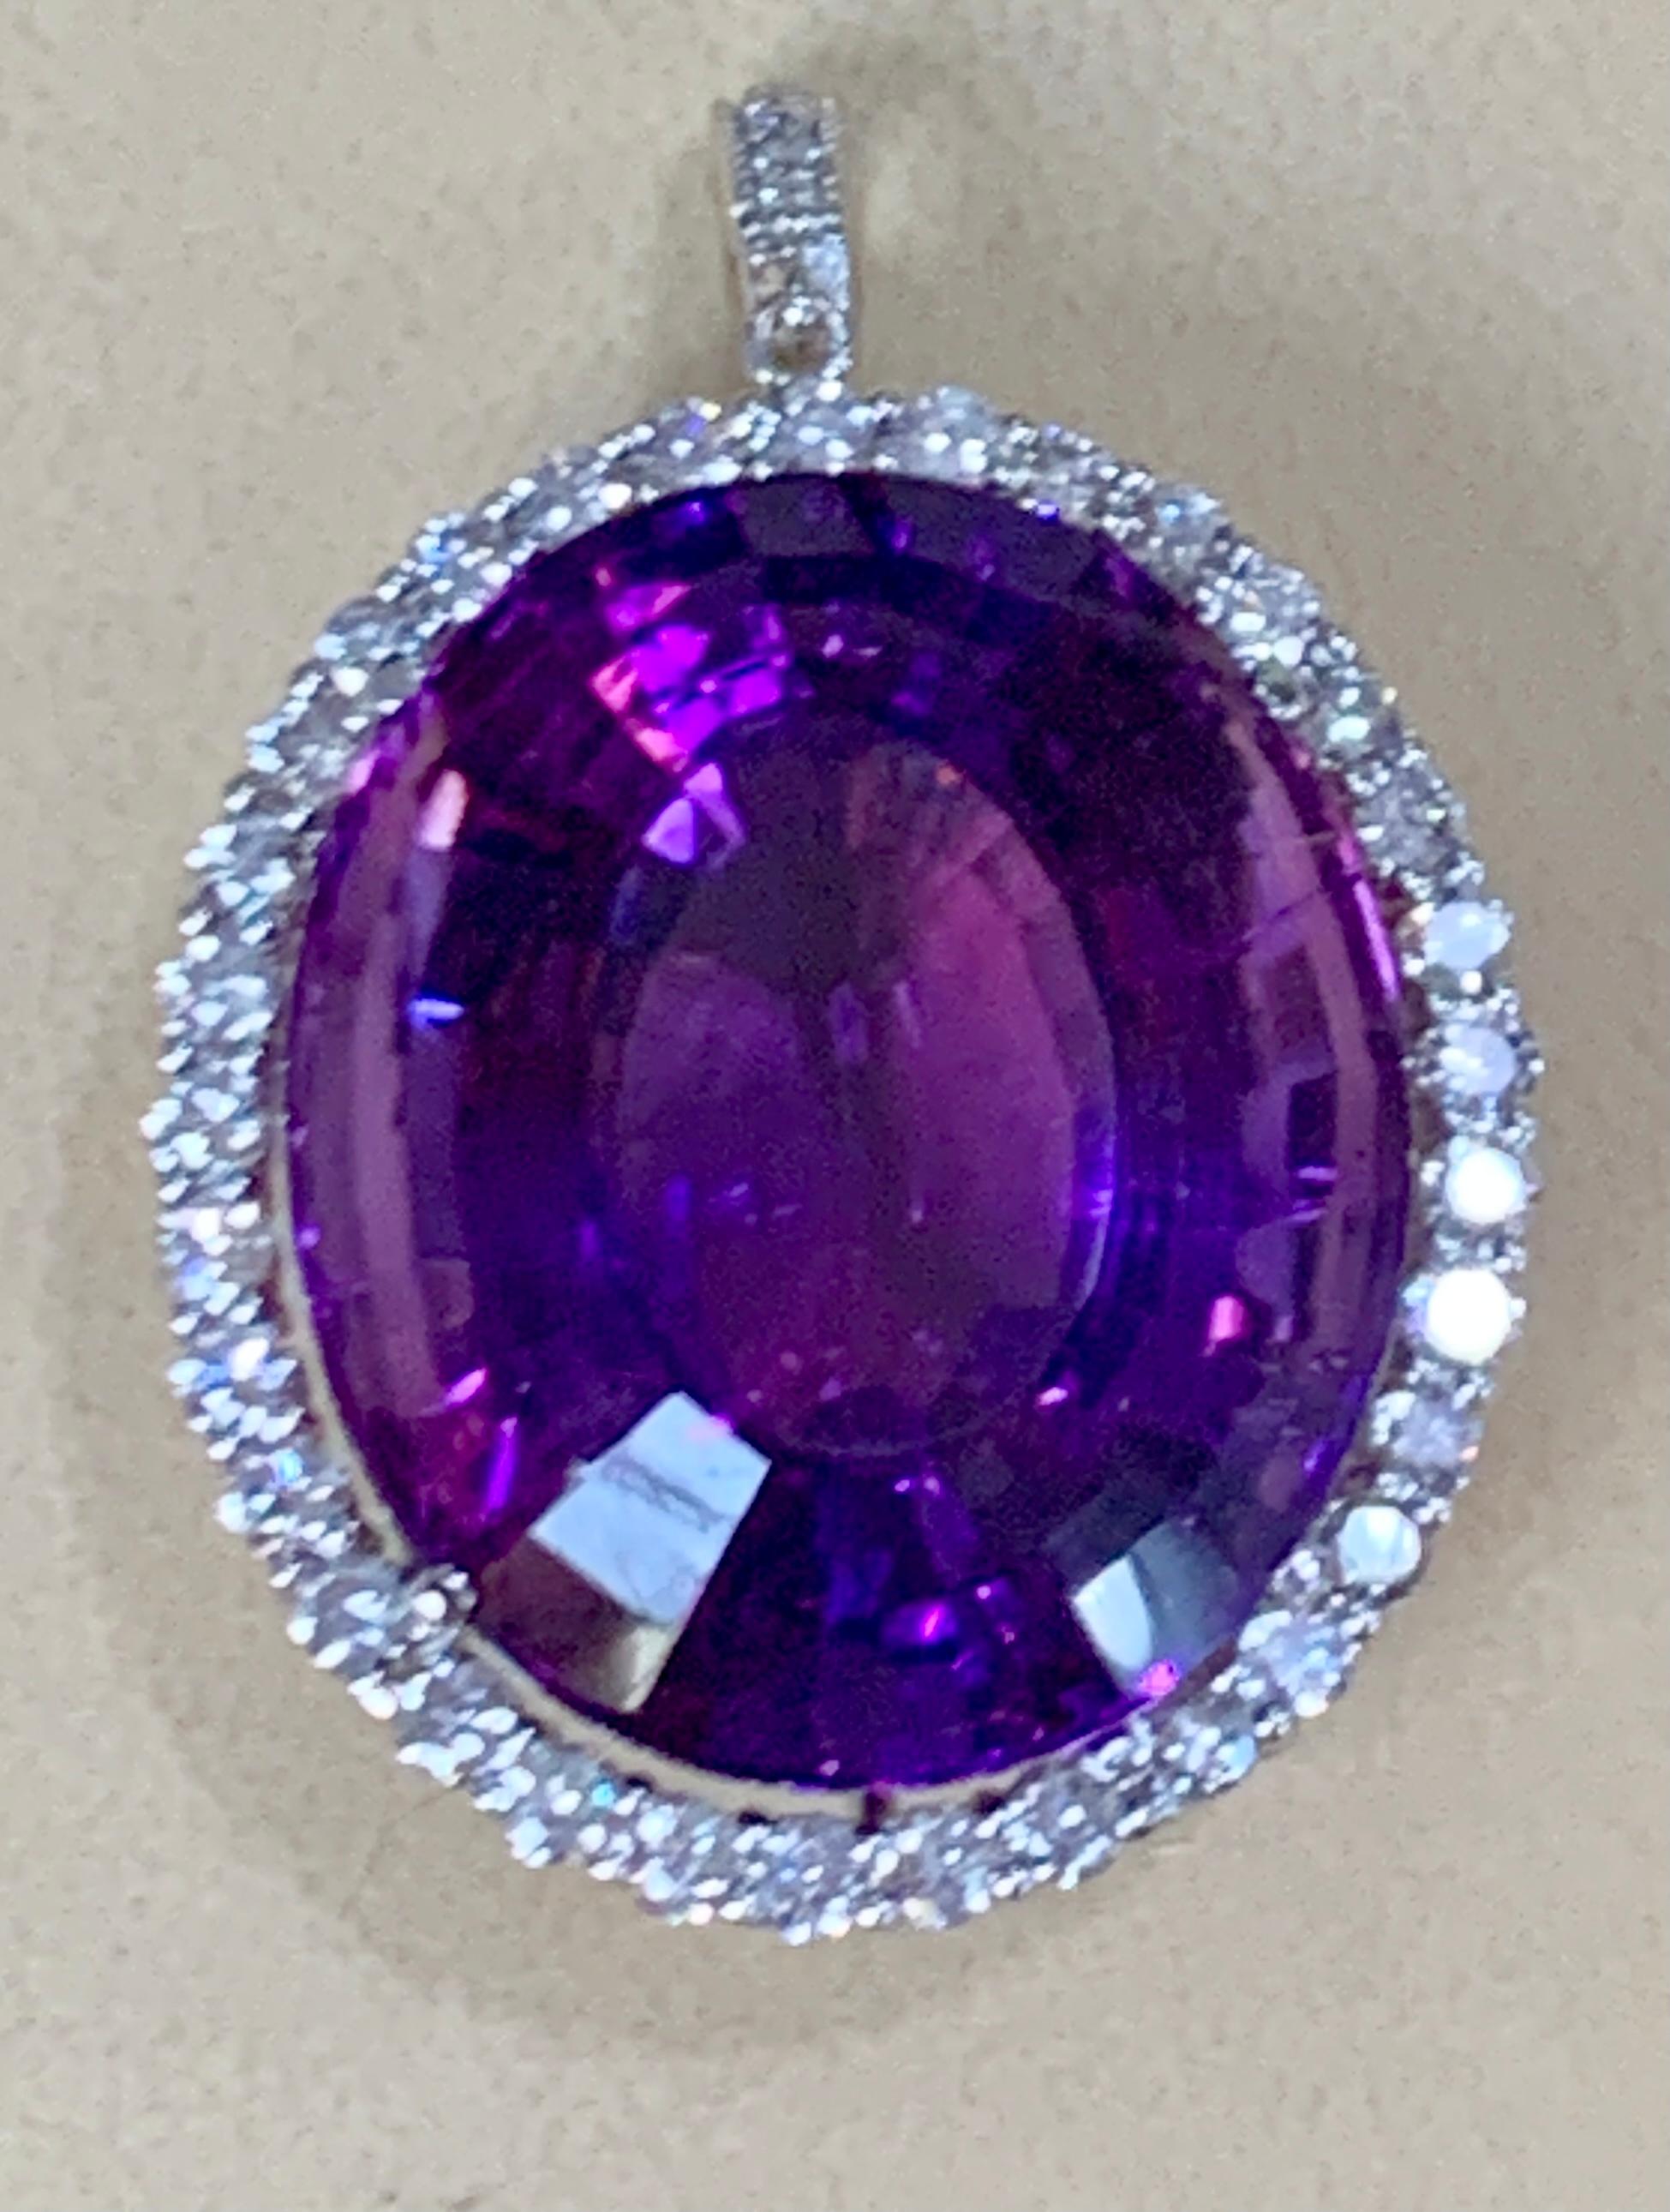   Approximately  80 Carat Amethyst & 3.5 Ct Diamond Pendant Necklace 14 Karat White Gold + Chain
This spectacular Pendant Necklace  consisting of a single large Oval Amethyst , approximately  80 Carat.  The  Amethyst   Has Circle of diamonds around